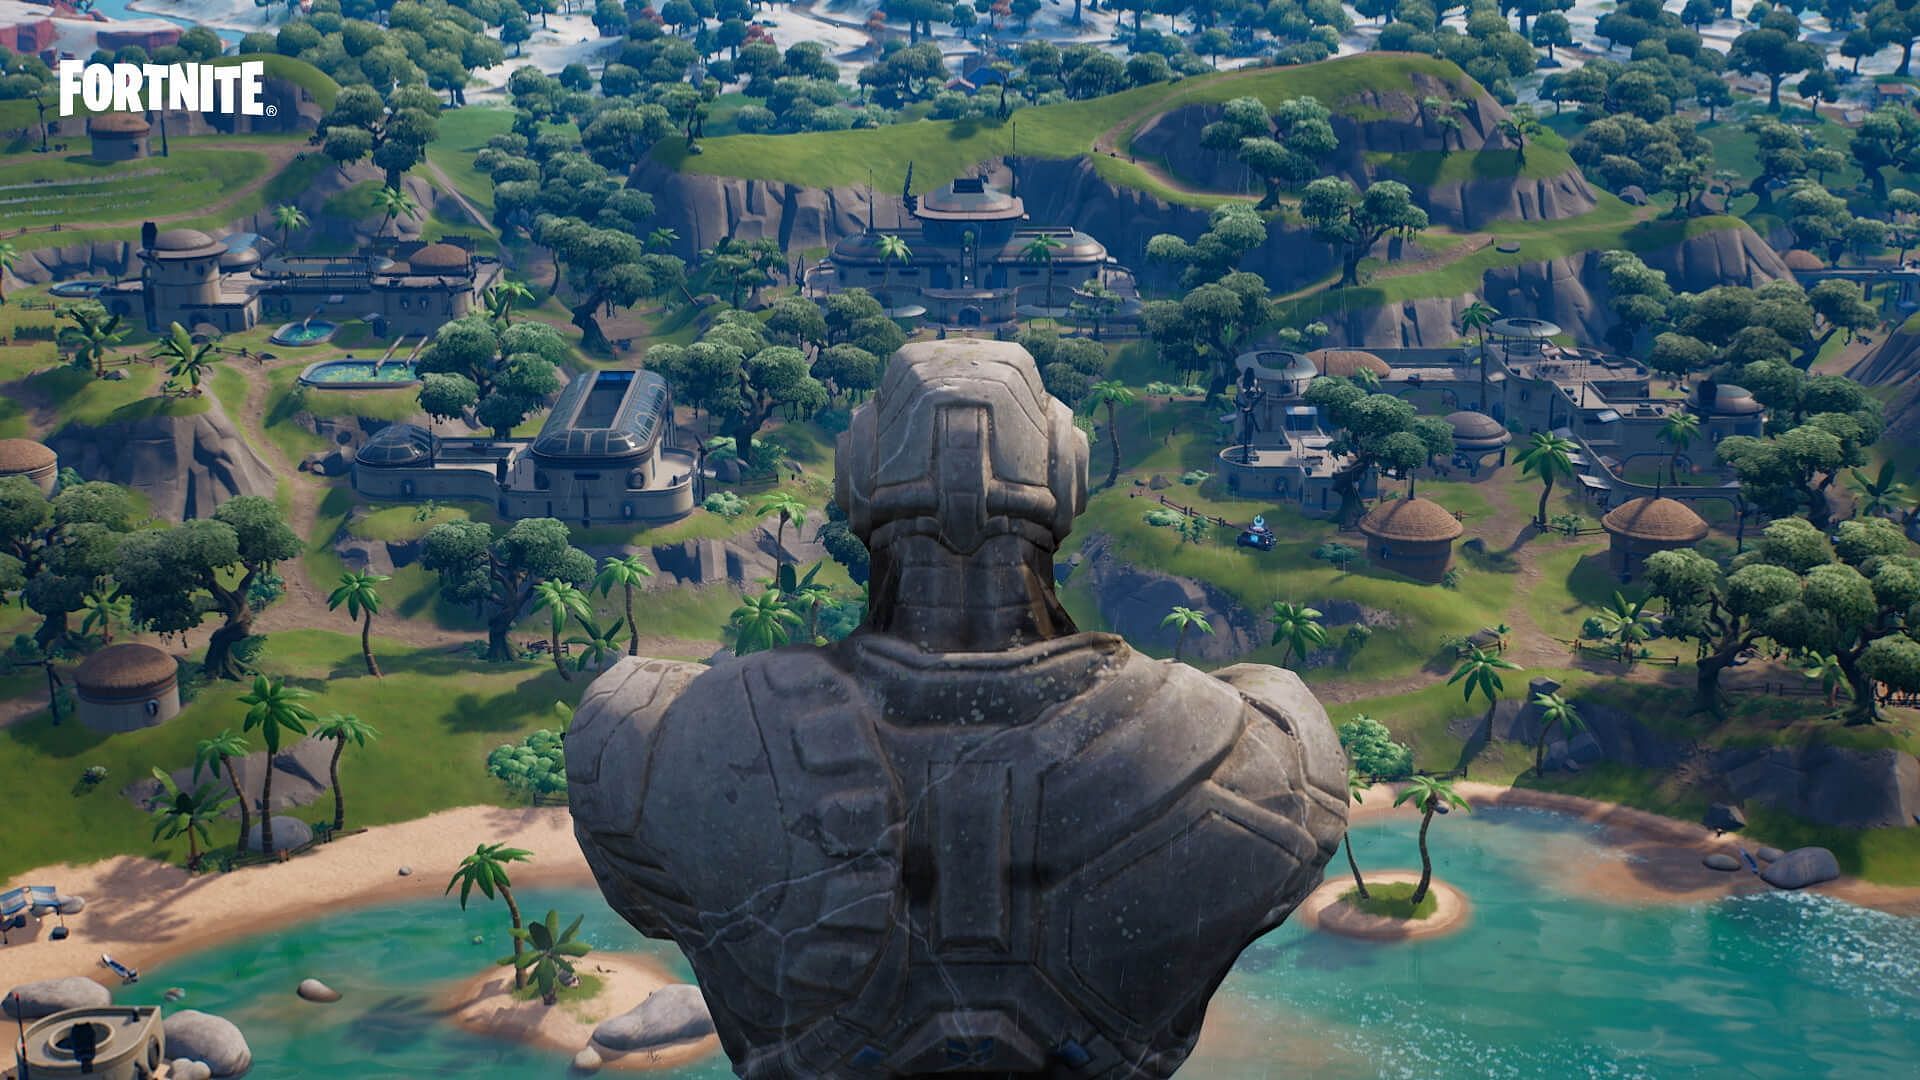 Sanctuary is the best landing spot for Mythic weapons in Fortnite Chapter 3 Season 1 (Image via Epic Games)